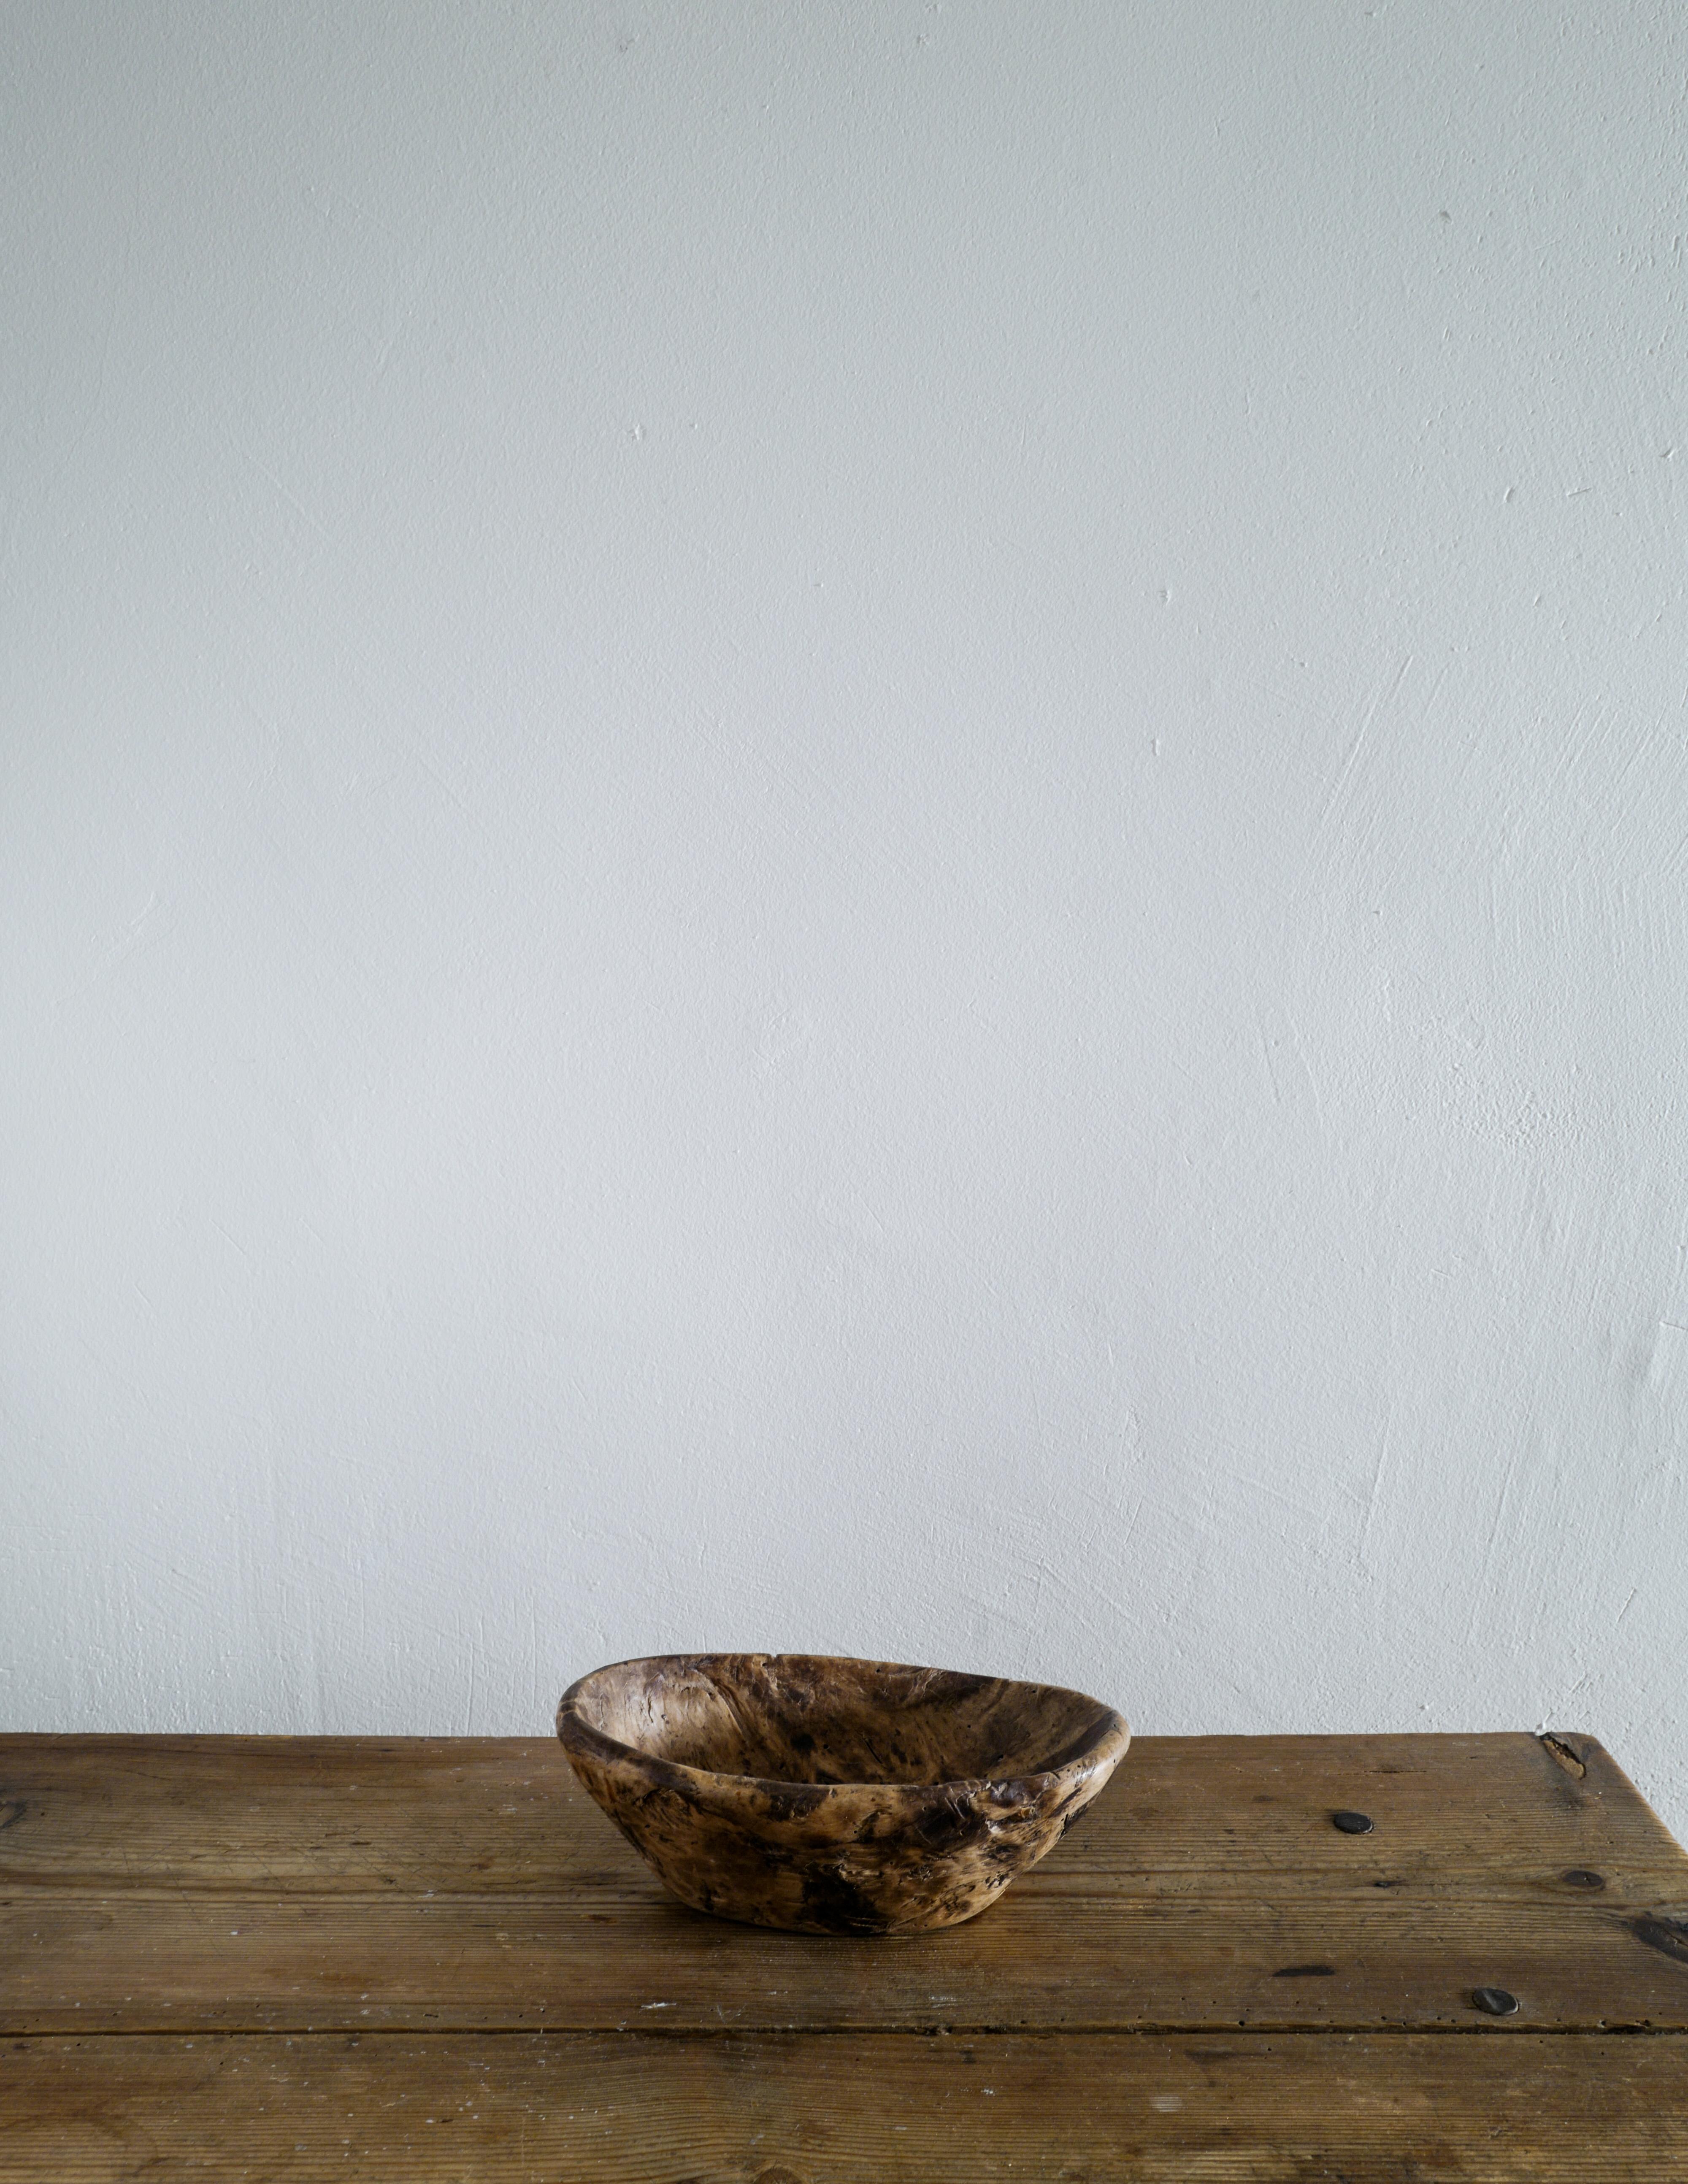 Rare and beautiful wooden bowl in a wabi sabi style produced in Sweden during the early 1800s. In good vintage condition showing nice patina from use and age.